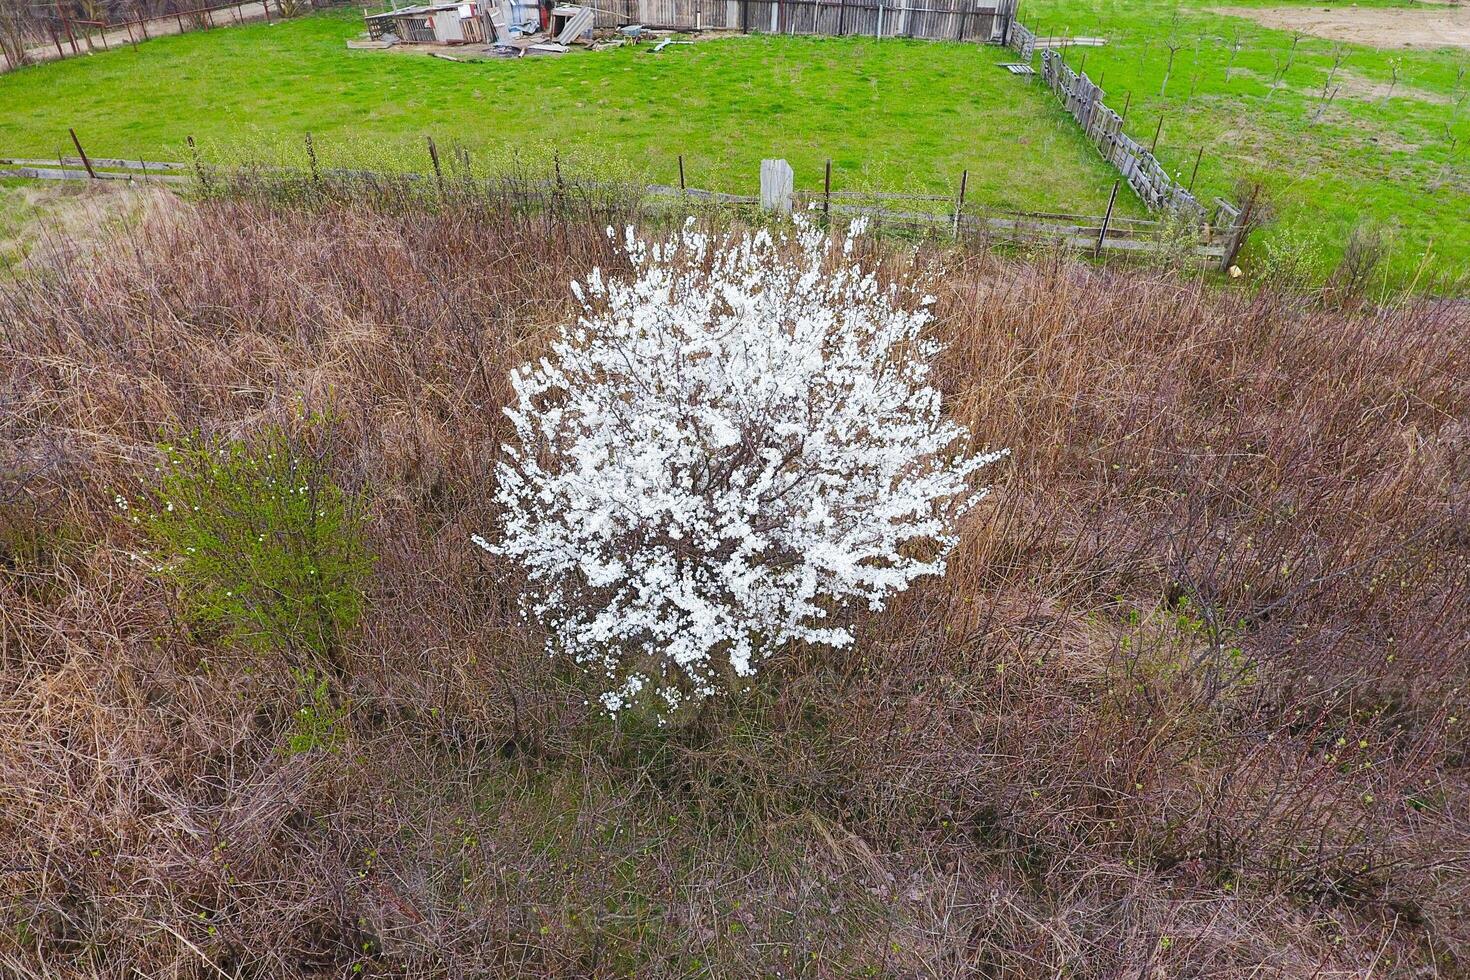 Blooming cherry plum. A plum tree among dry grass. White flowers of plum trees on the branches of a tree. Spring garden. photo